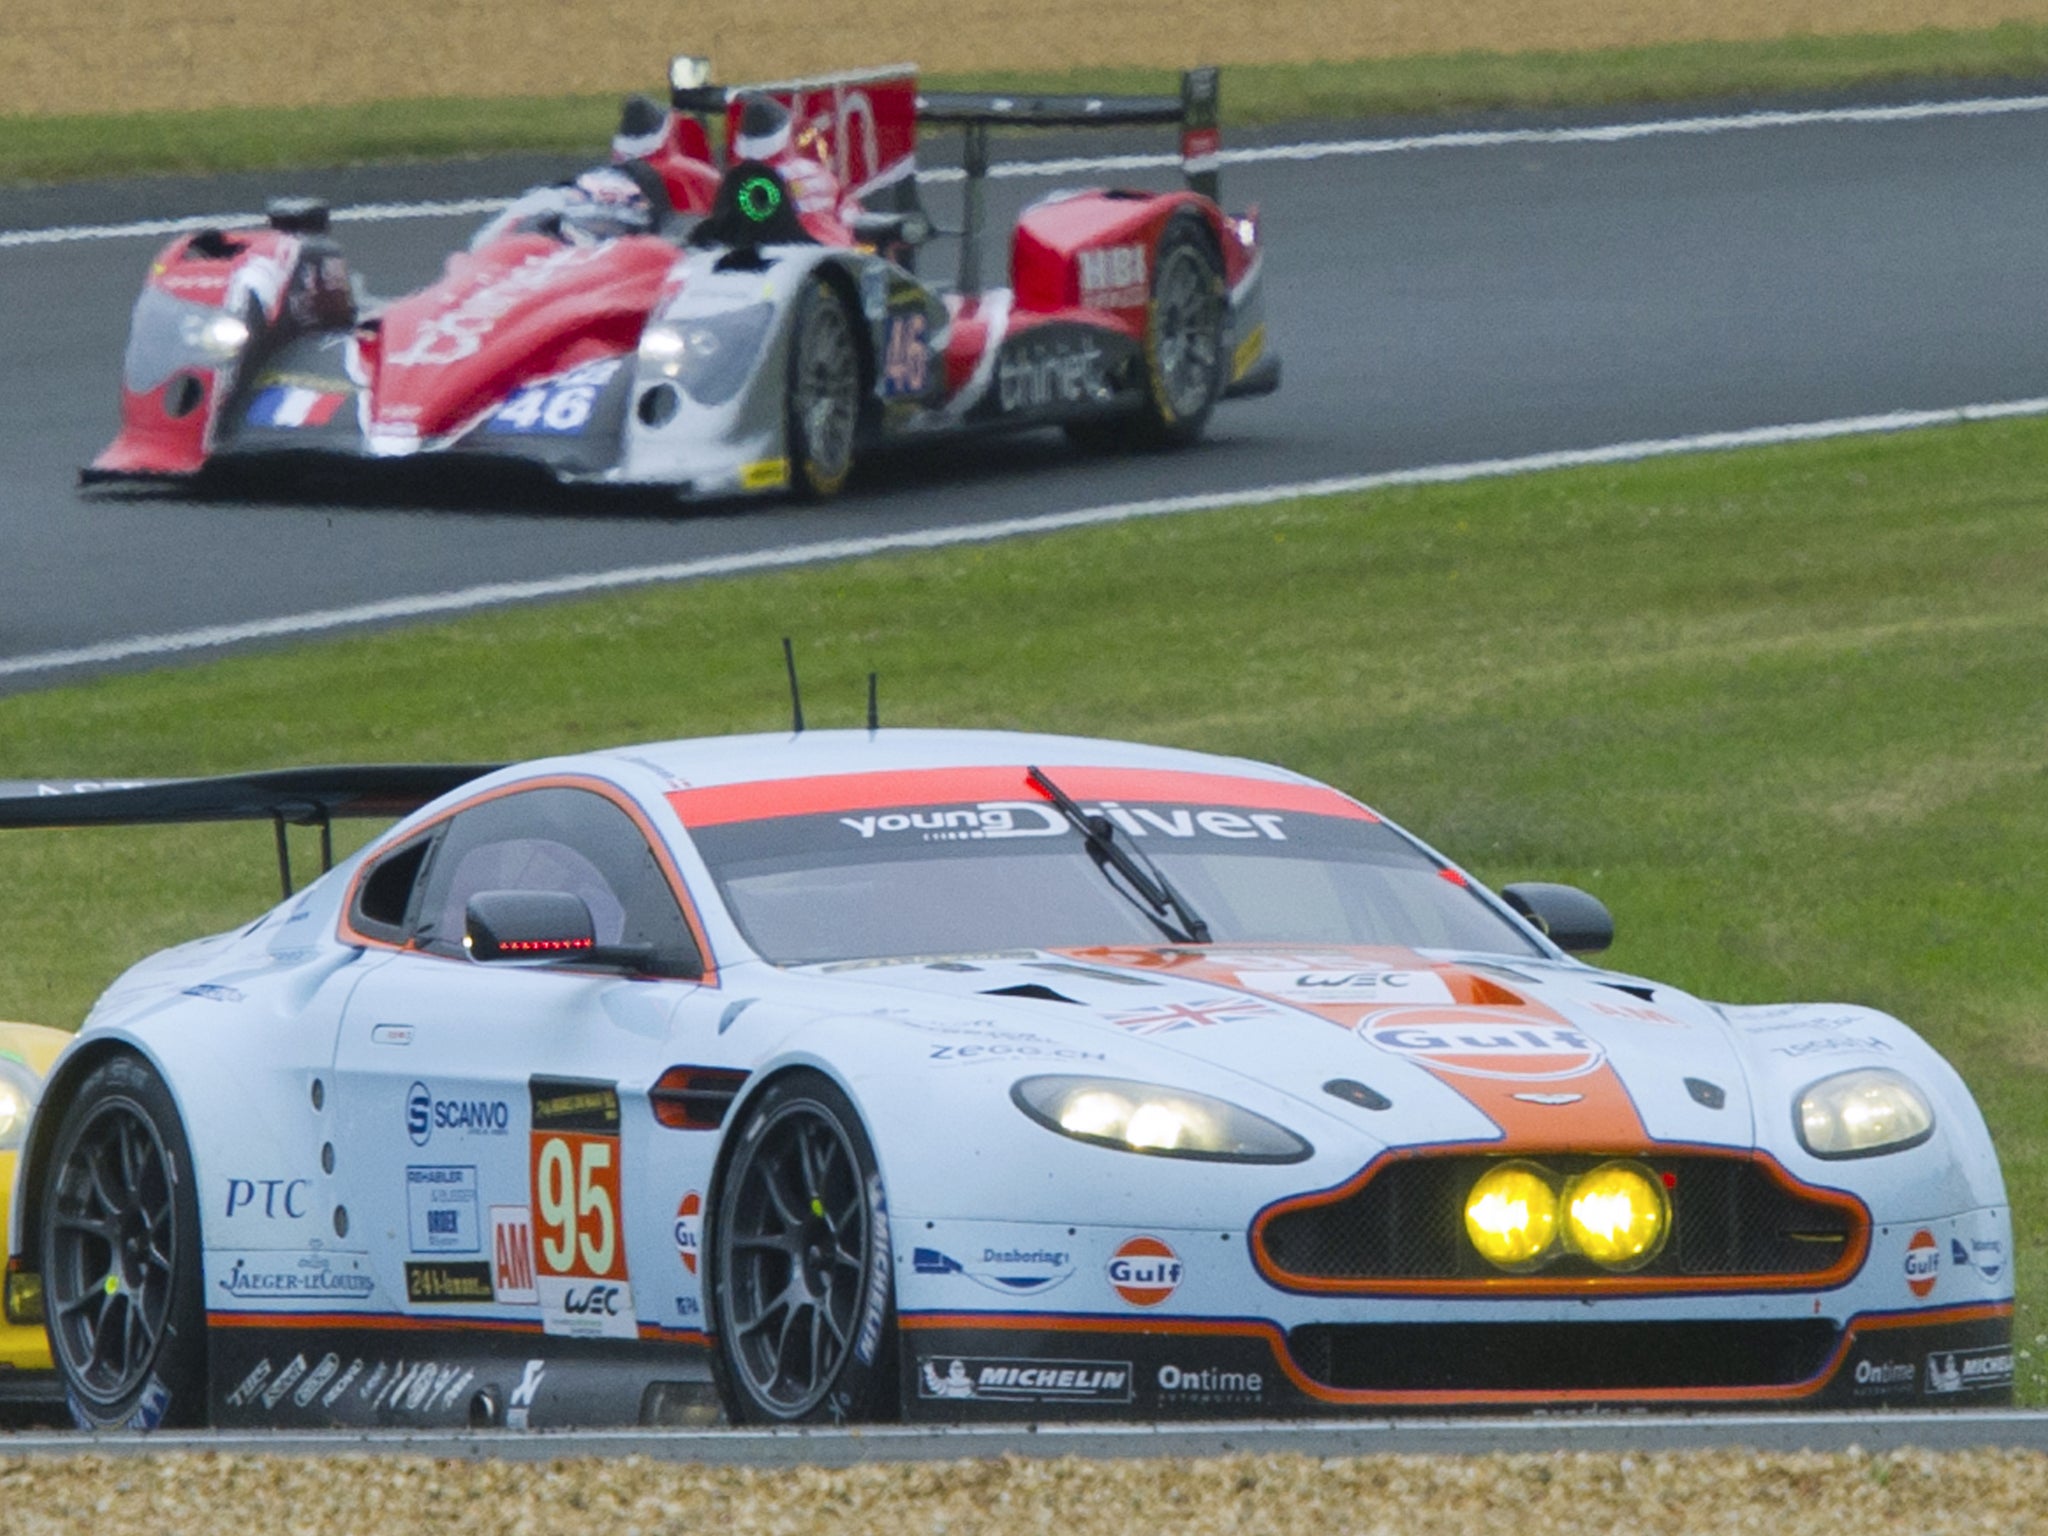 Danish driver Allan Simonsen has died after a crash in the Le Mans 24 hours